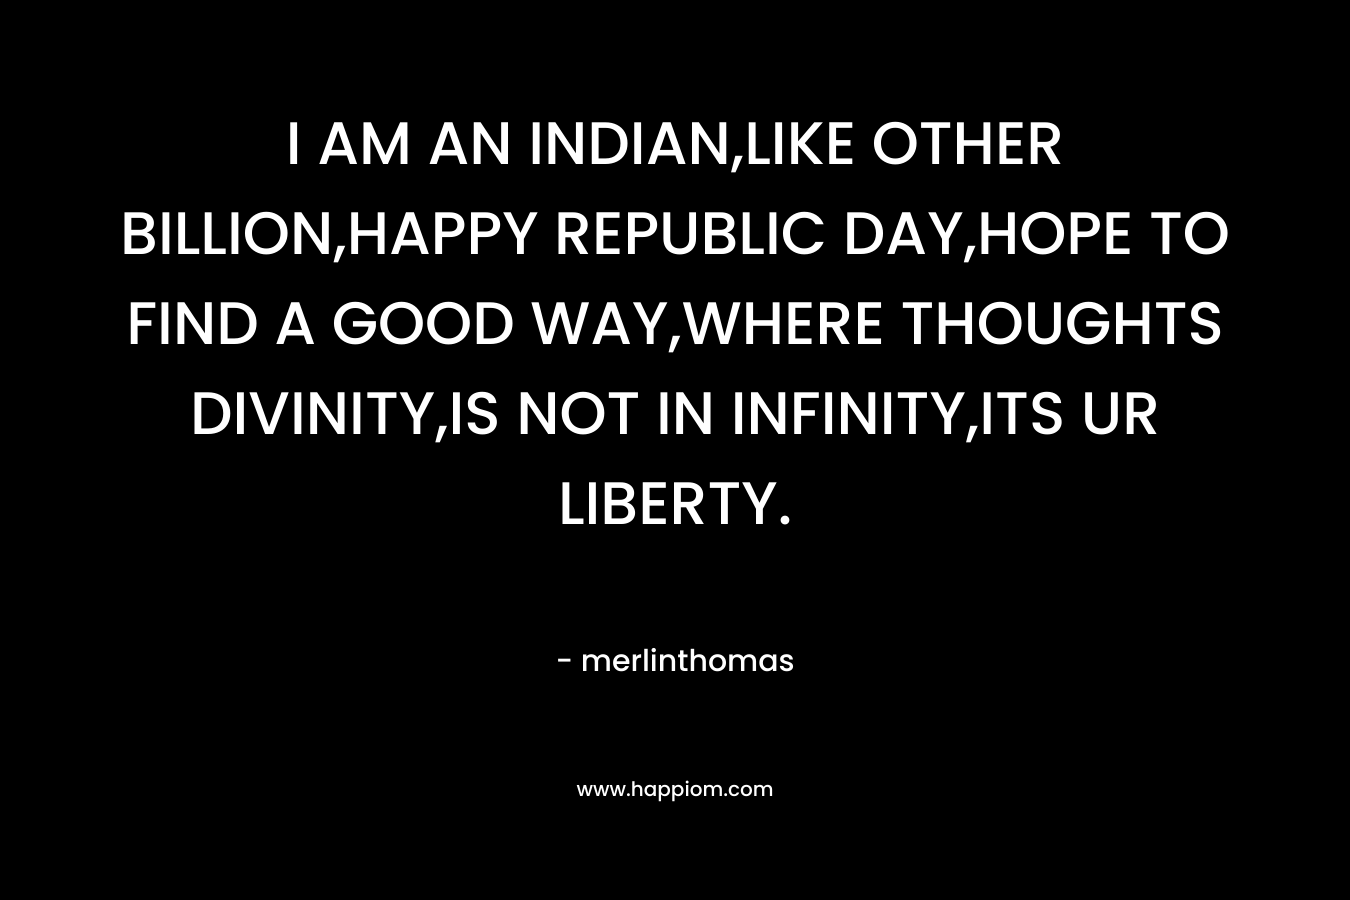 I AM AN INDIAN,LIKE OTHER BILLION,HAPPY REPUBLIC DAY,HOPE TO FIND A GOOD WAY,WHERE THOUGHTS DIVINITY,IS NOT IN INFINITY,ITS UR LIBERTY. – merlinthomas